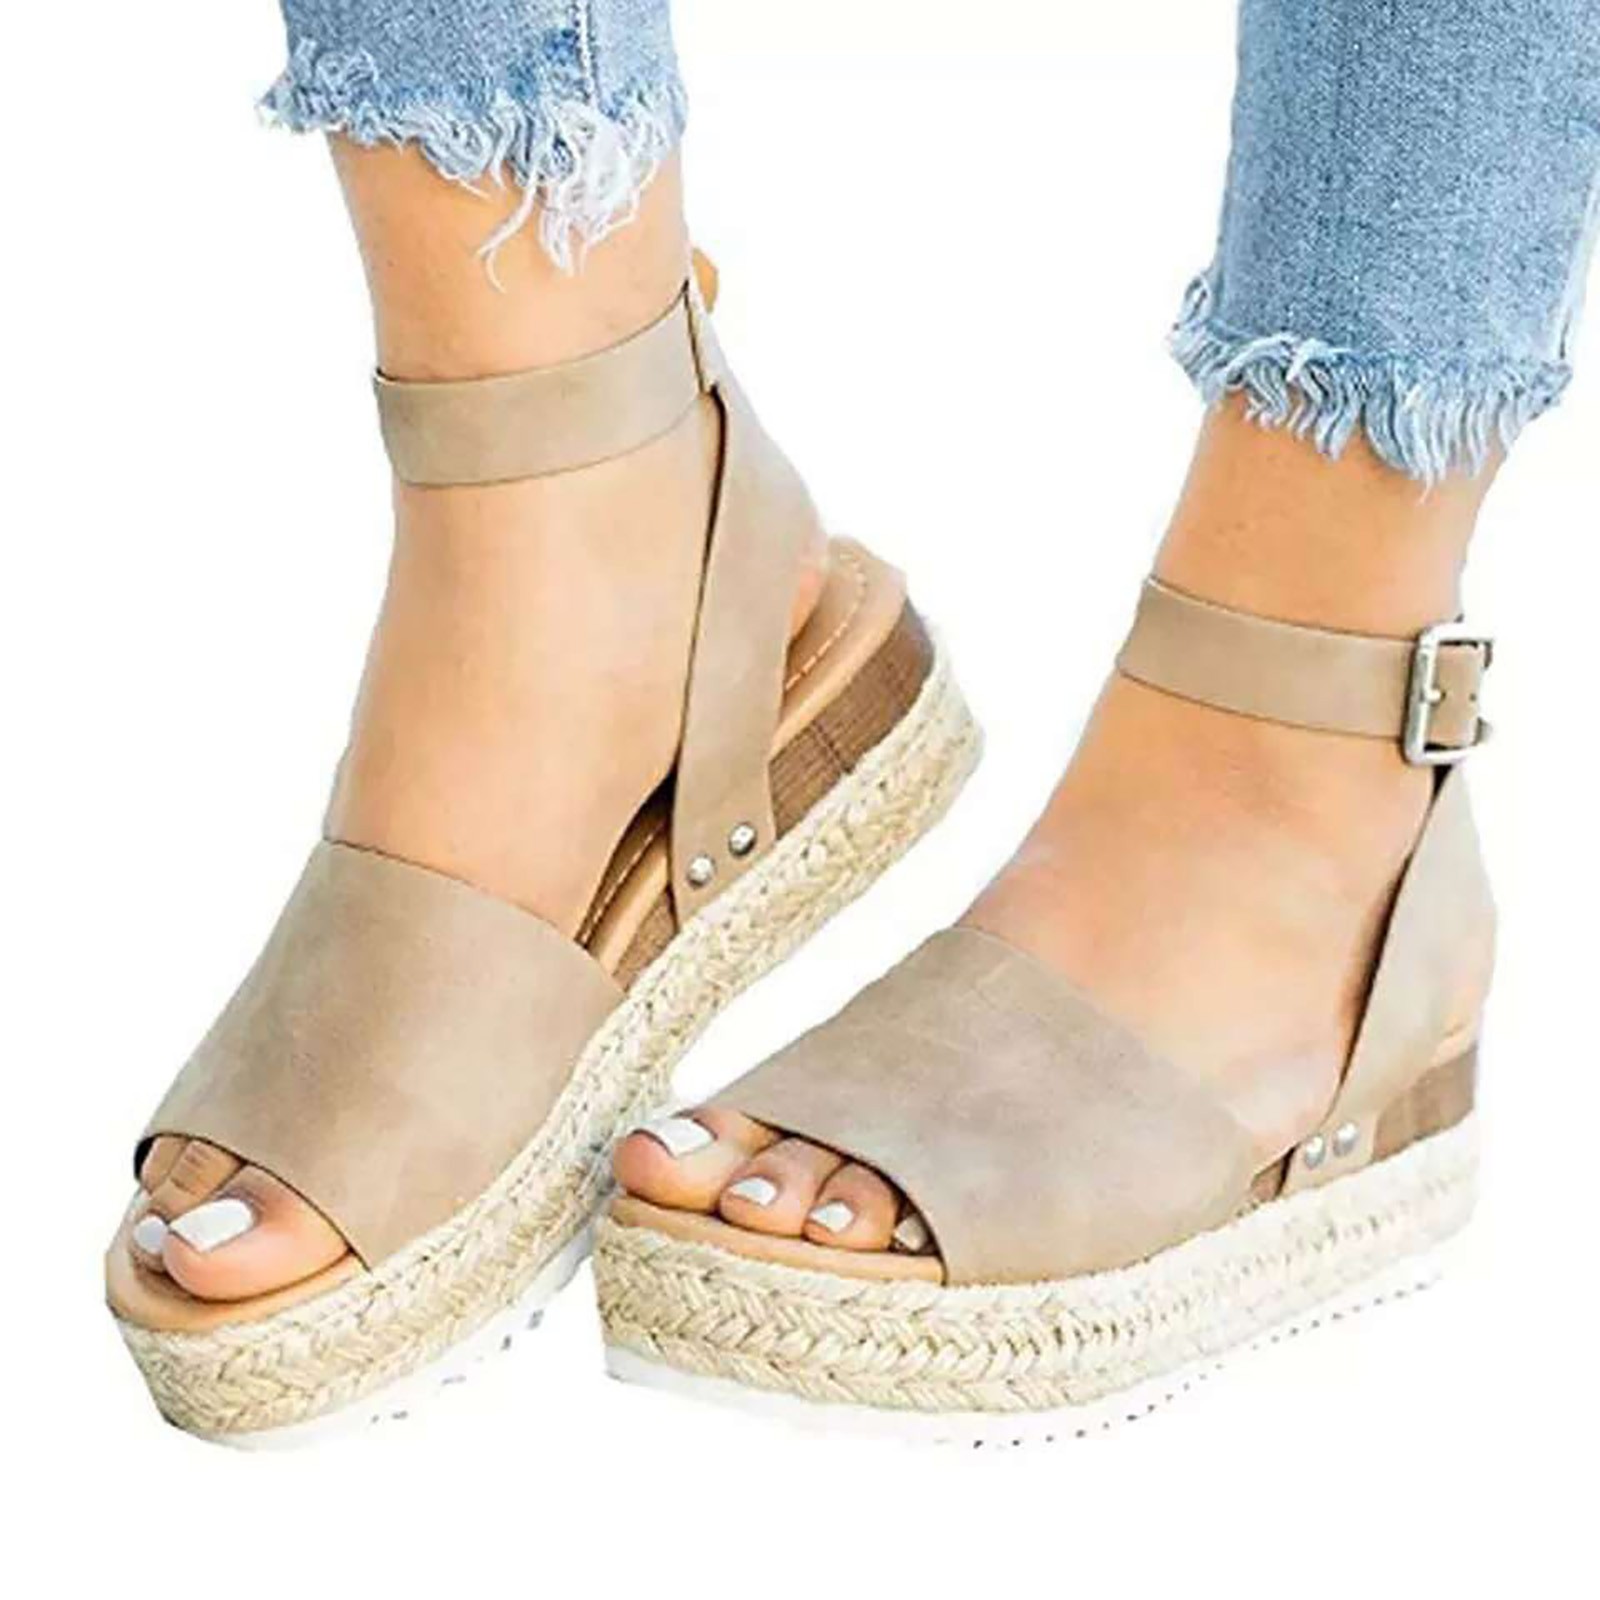 Azrian Woman Summer Sandals Open toe Casual Platform Wedge Shoes Casual Canvas Shoes - image 1 of 6